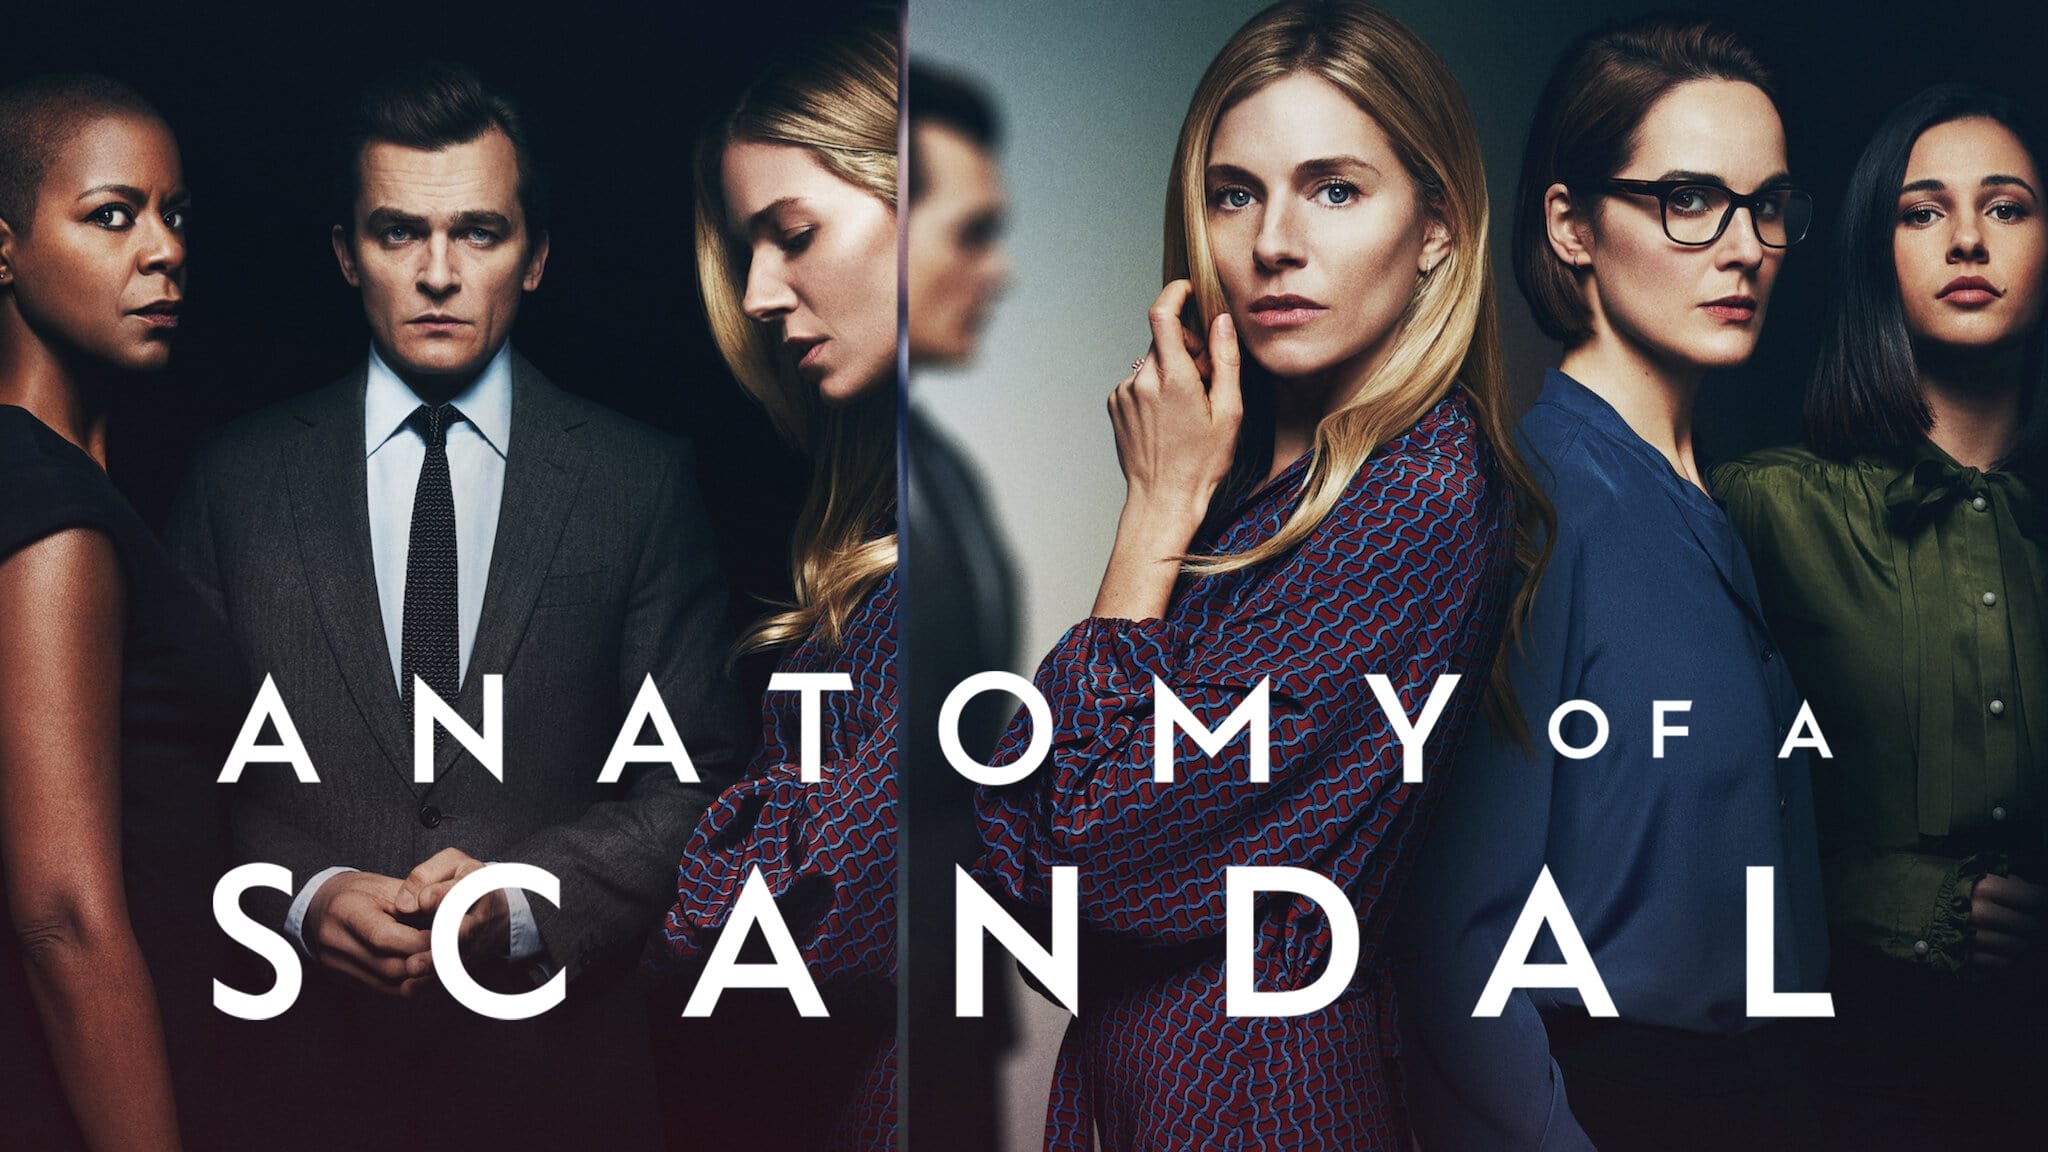 Anatomy of a Scandal